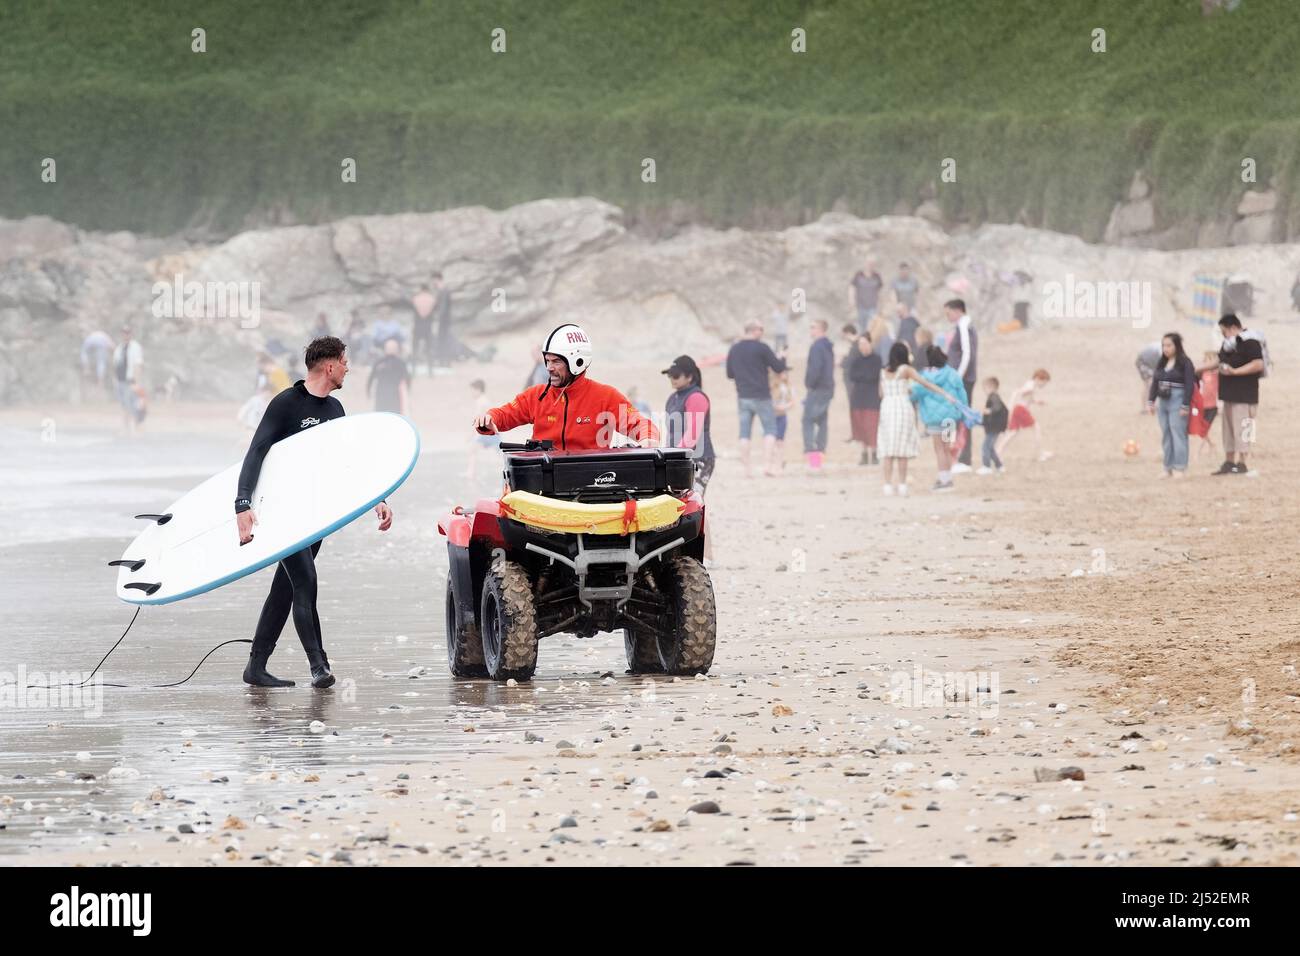 A RNLI Lifeguard offers advice to a surfer on a busy Fistral Beach, Newquay, UK. The lifeguards patrol on quad bikes at the popular surfing location Stock Photo